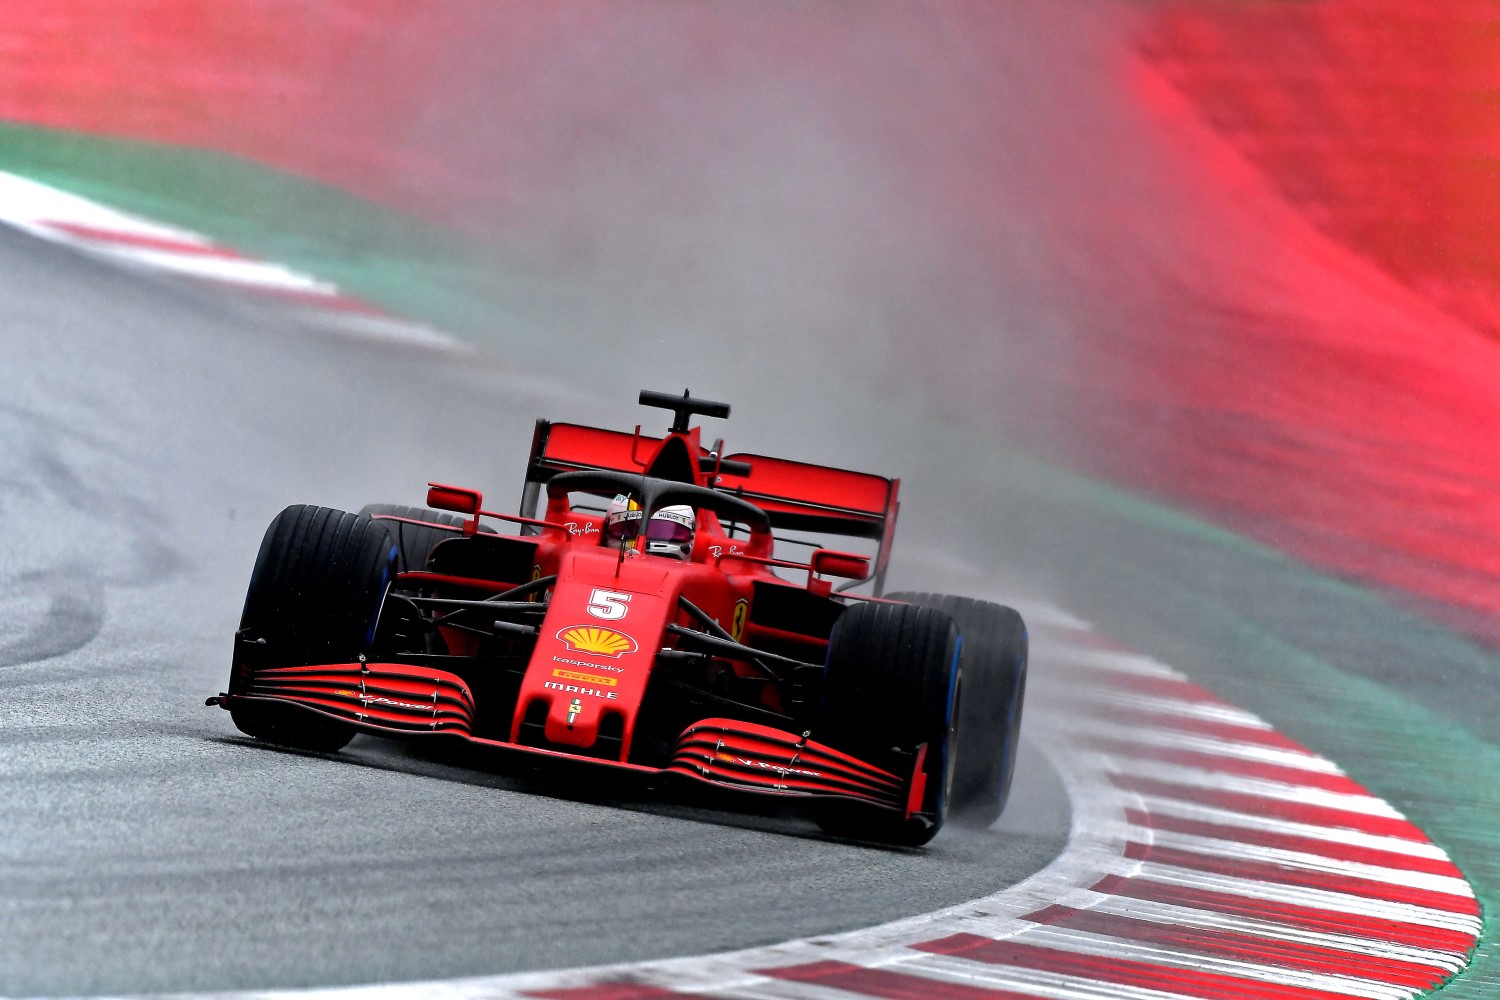 Vettel got what he could out of the hapless Ferrari Saturday - 10th